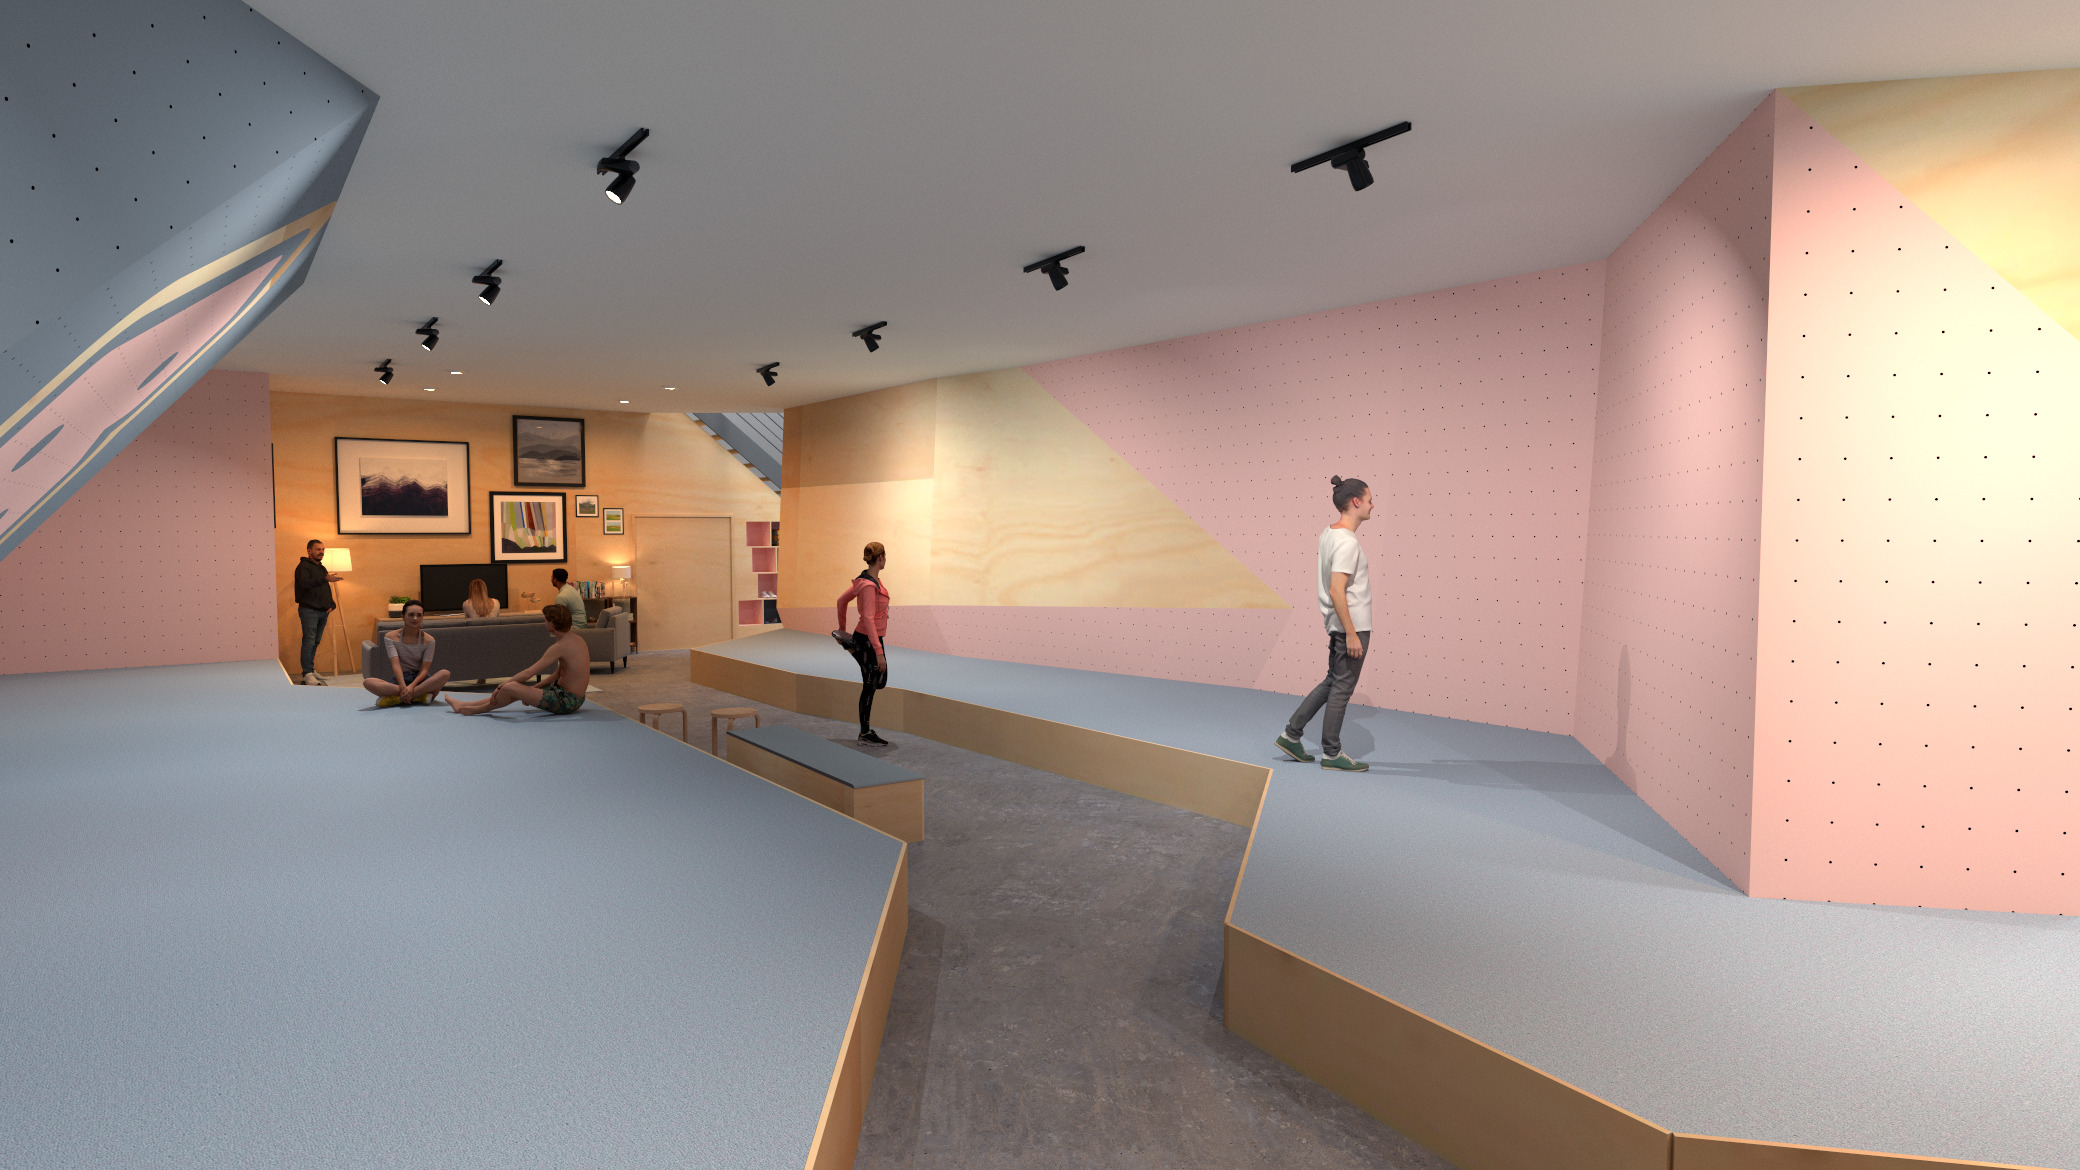 A 3d rendering of a boulderhall with people on the floor.